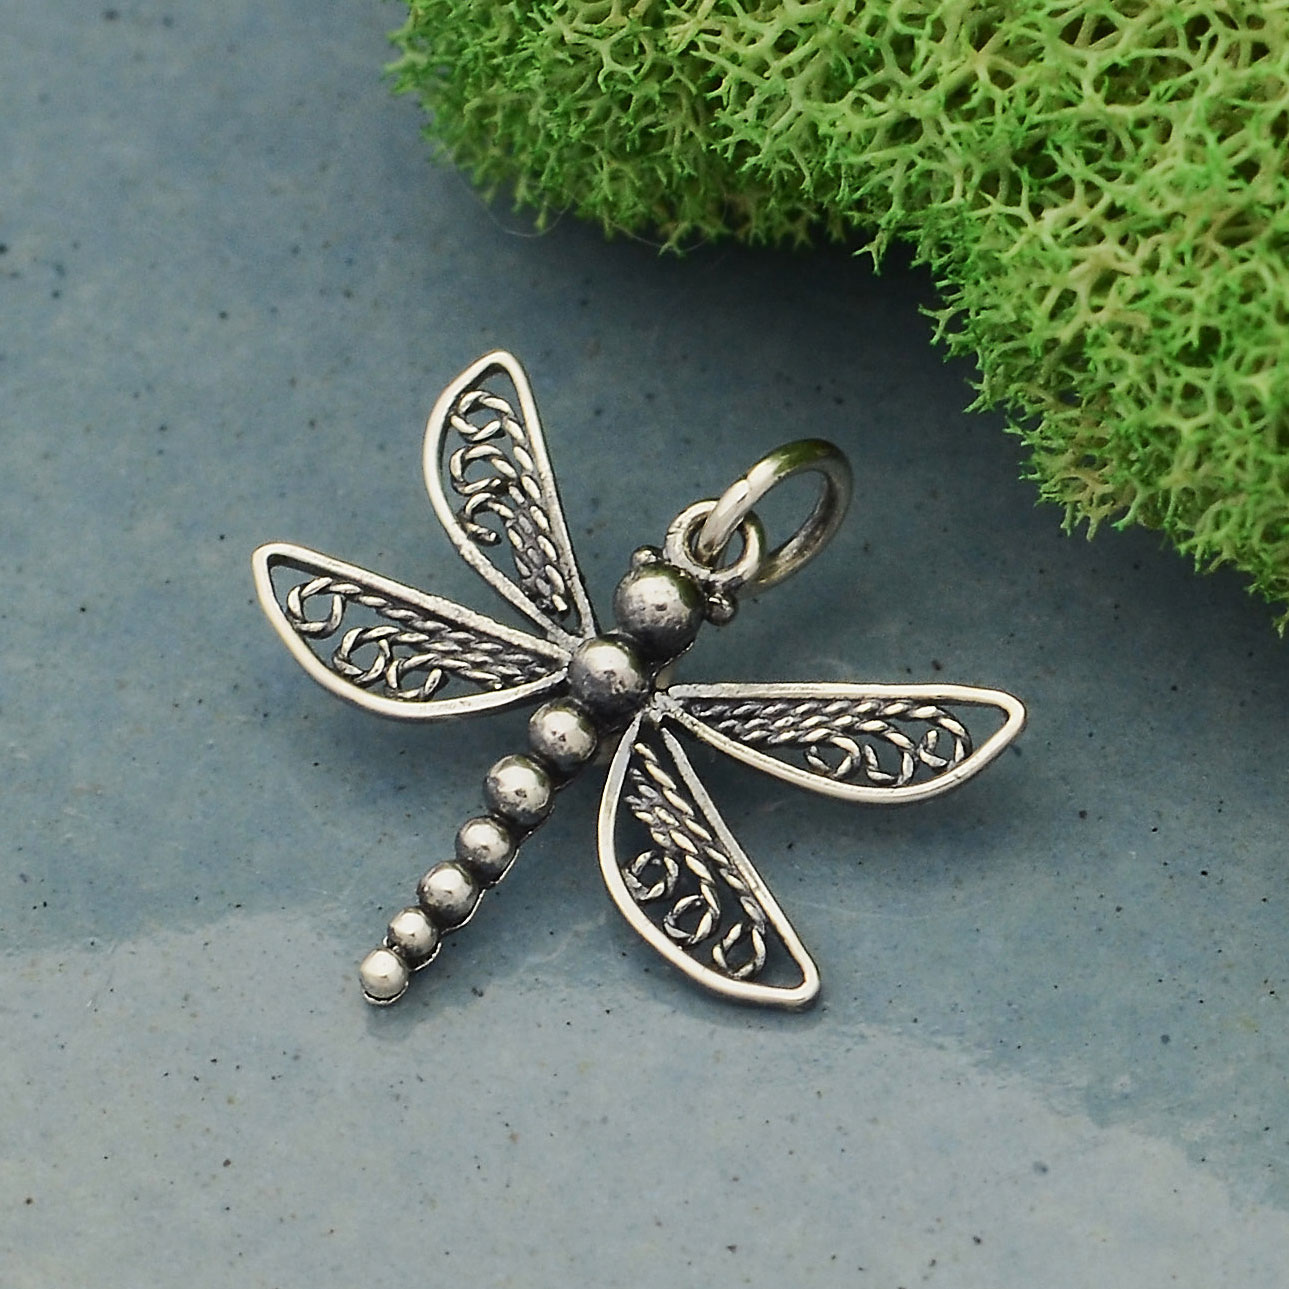 10 Dragonfly Charms 17mm Wholesale Antiqued Gold Plated Animal Pendants GC0001595